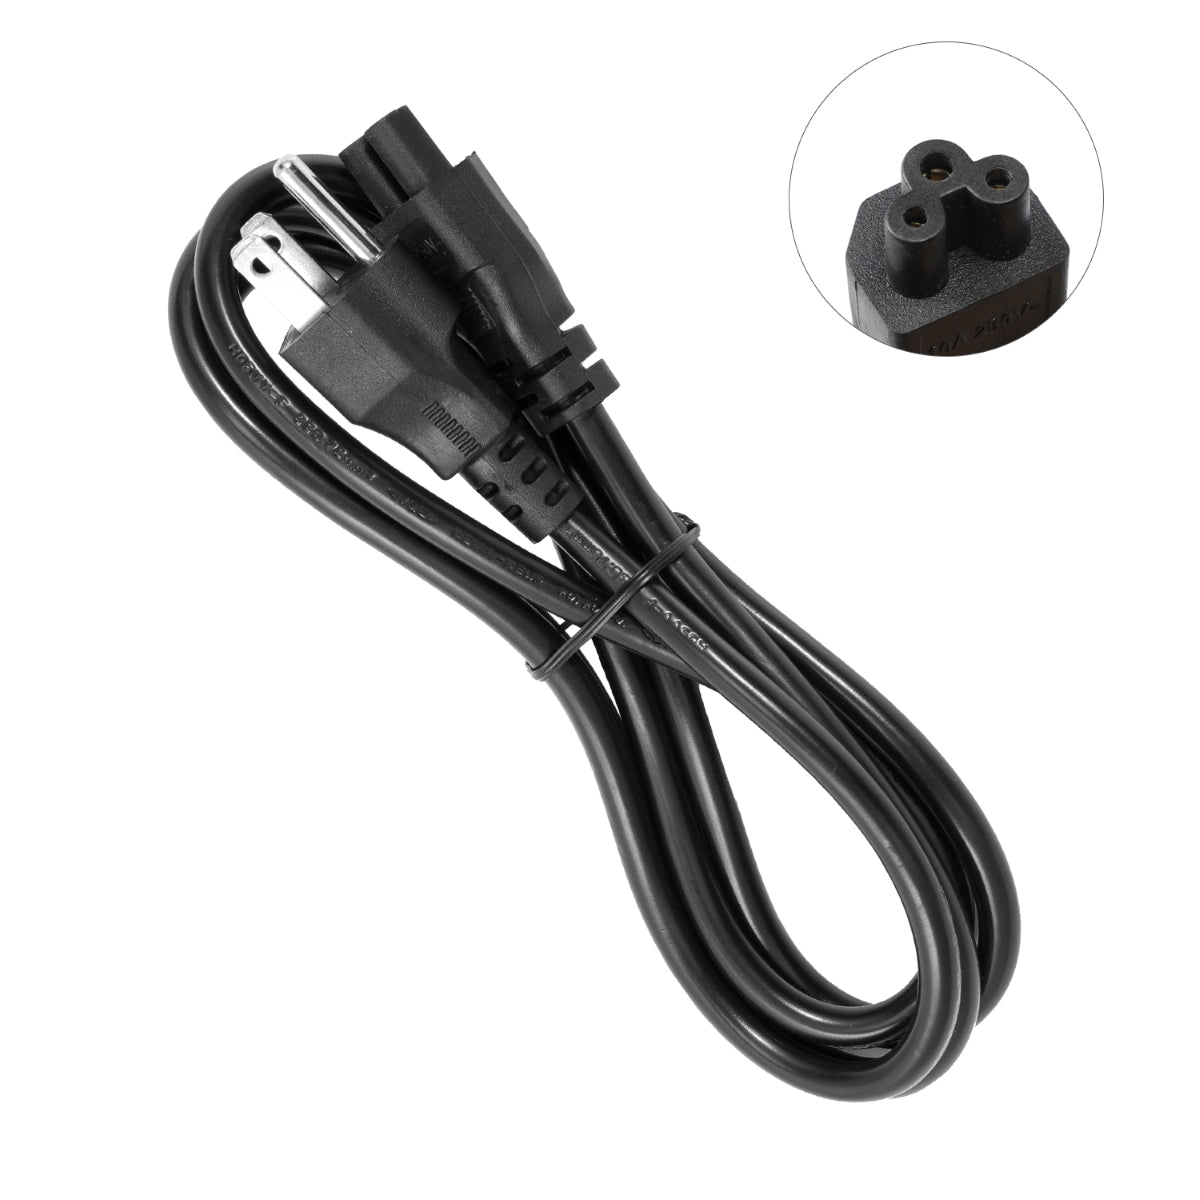 Power Cord for LG 42LN5300 Monitor.